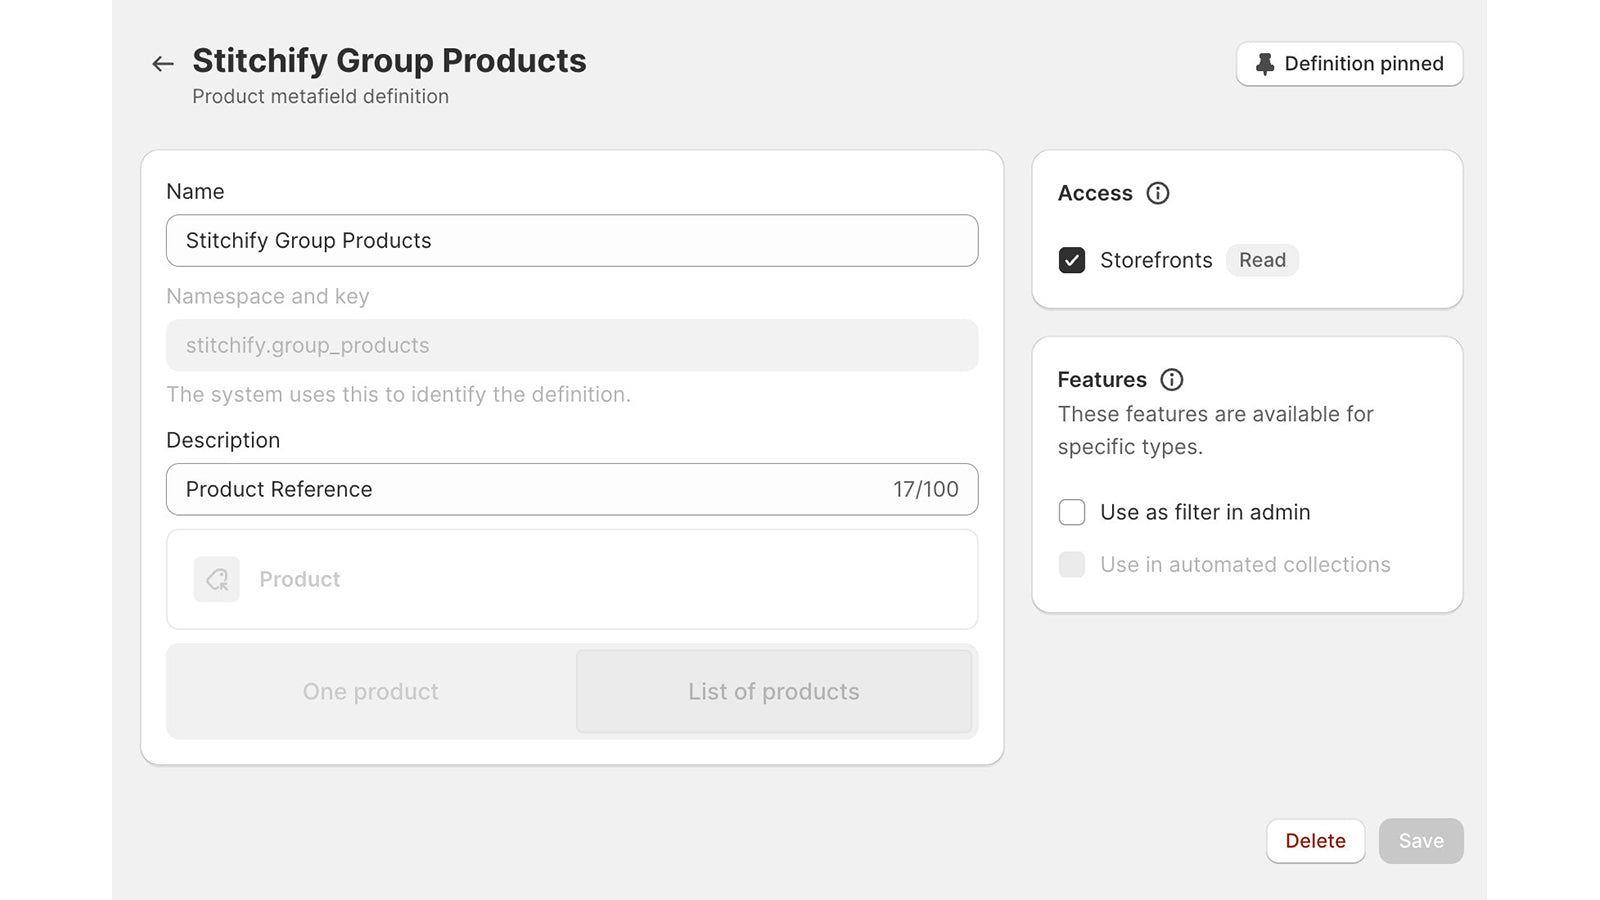 stitchify creates a list.product_reference on a product level